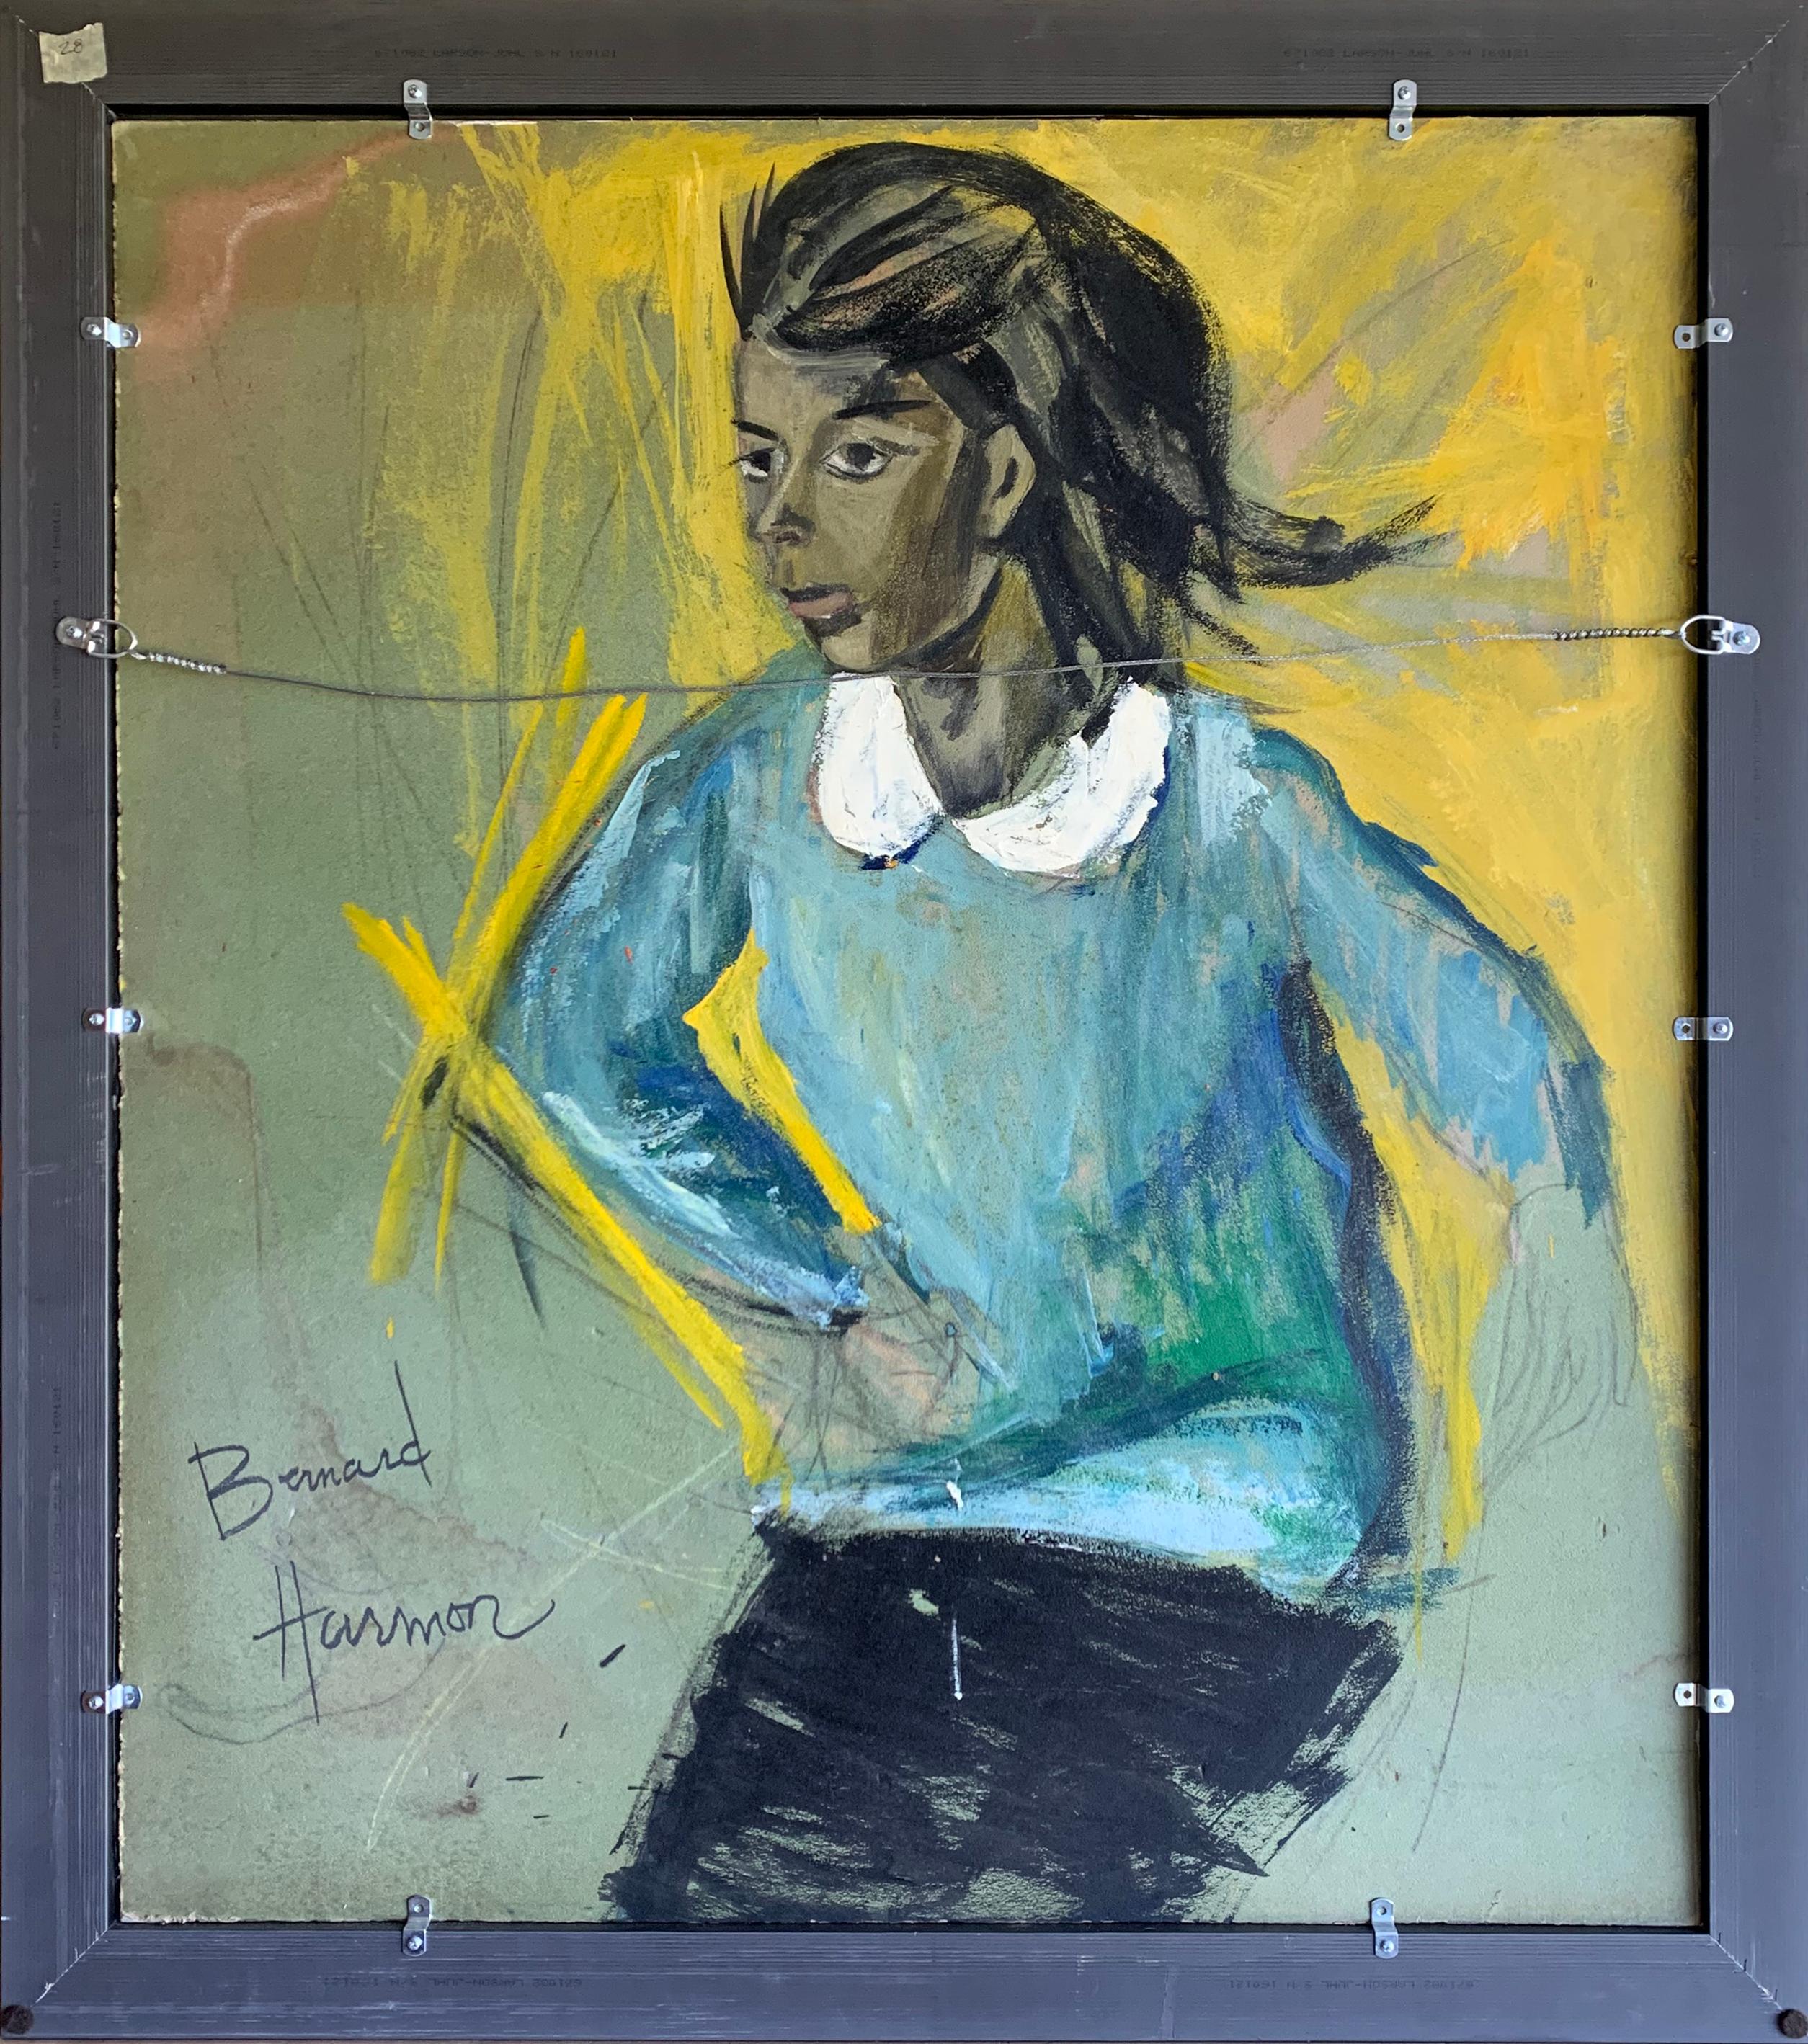 Girl with Ribbon in Hair, Expressionist Portrait by Philadelphia Artist - Painting by Bernard Harmon